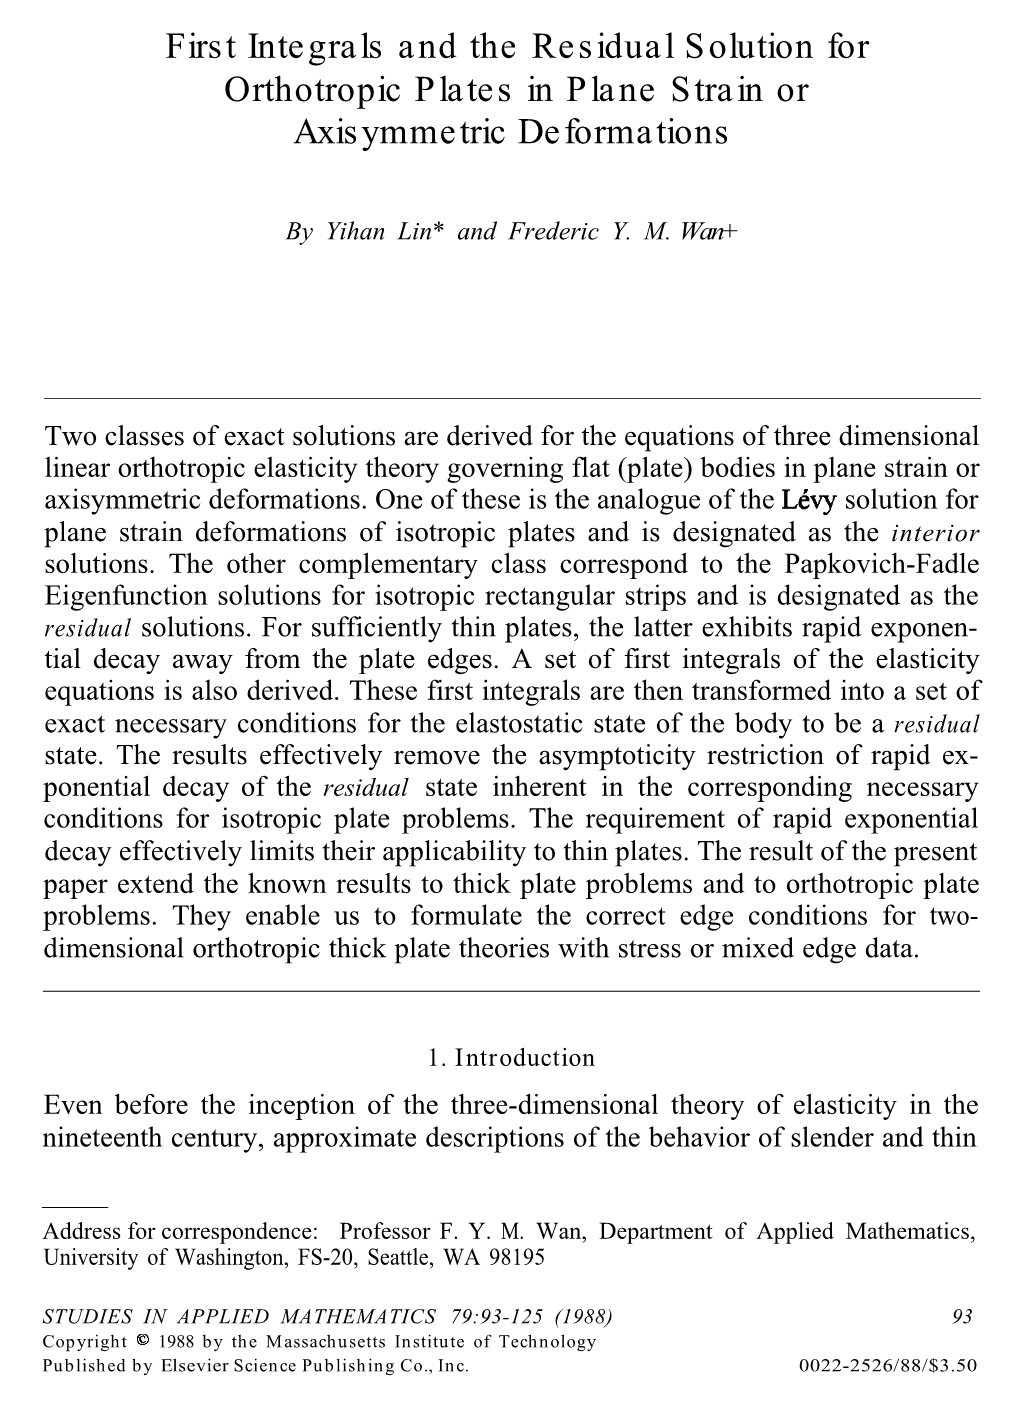 First Integrals and the Residual Solution for Orthotropic Plates in Plane Strain Or Axisymmetric Deformations